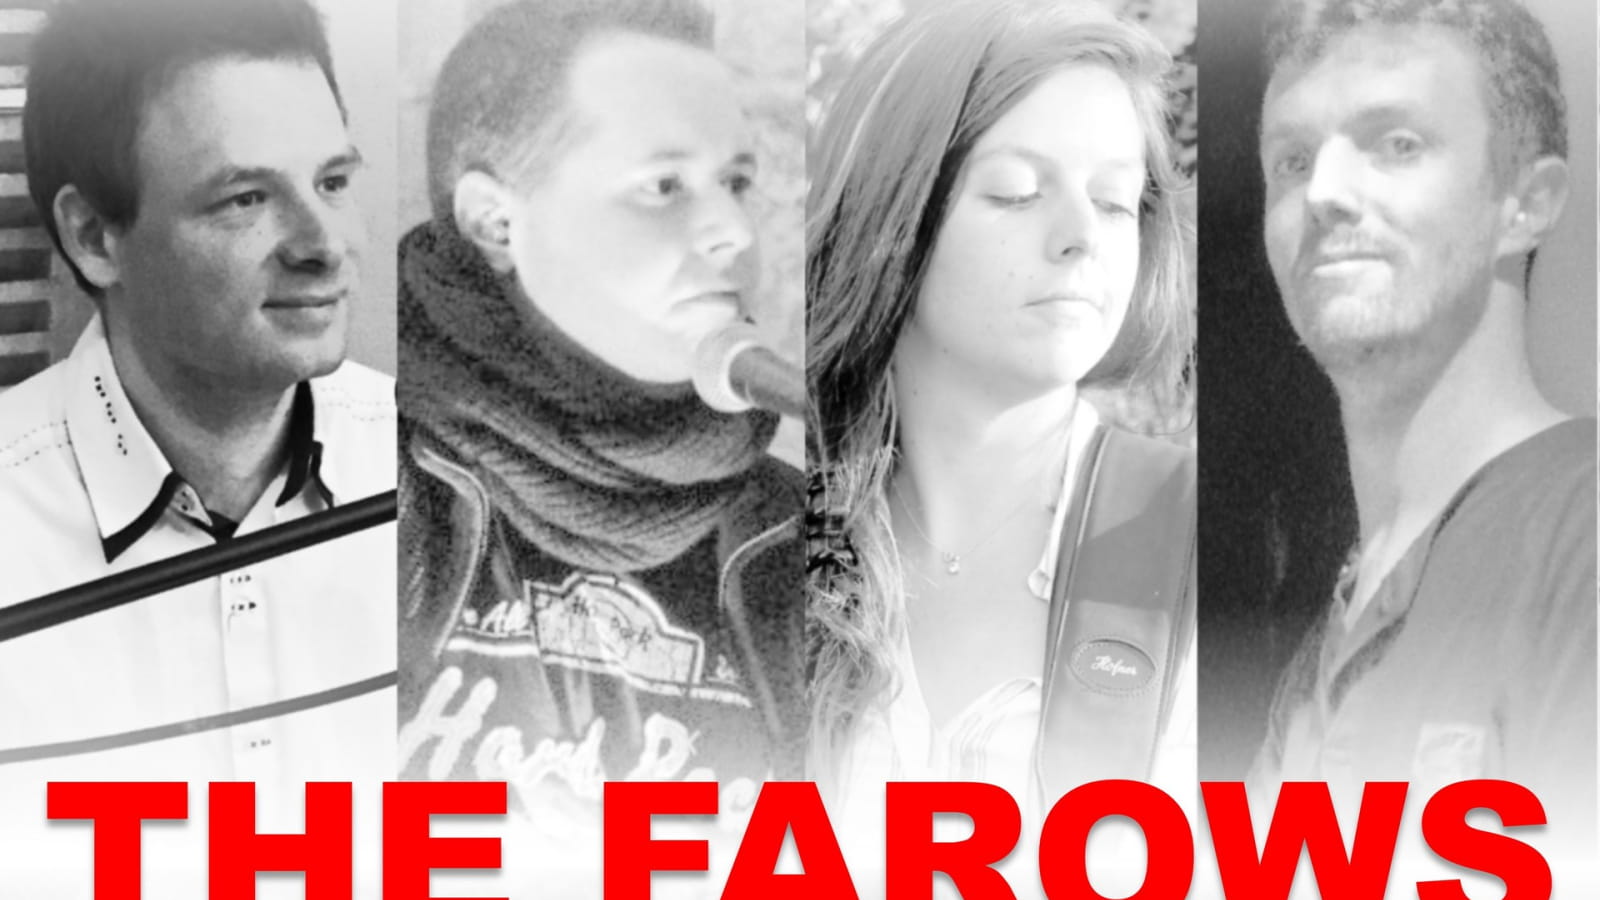 Concert: 'The farows'